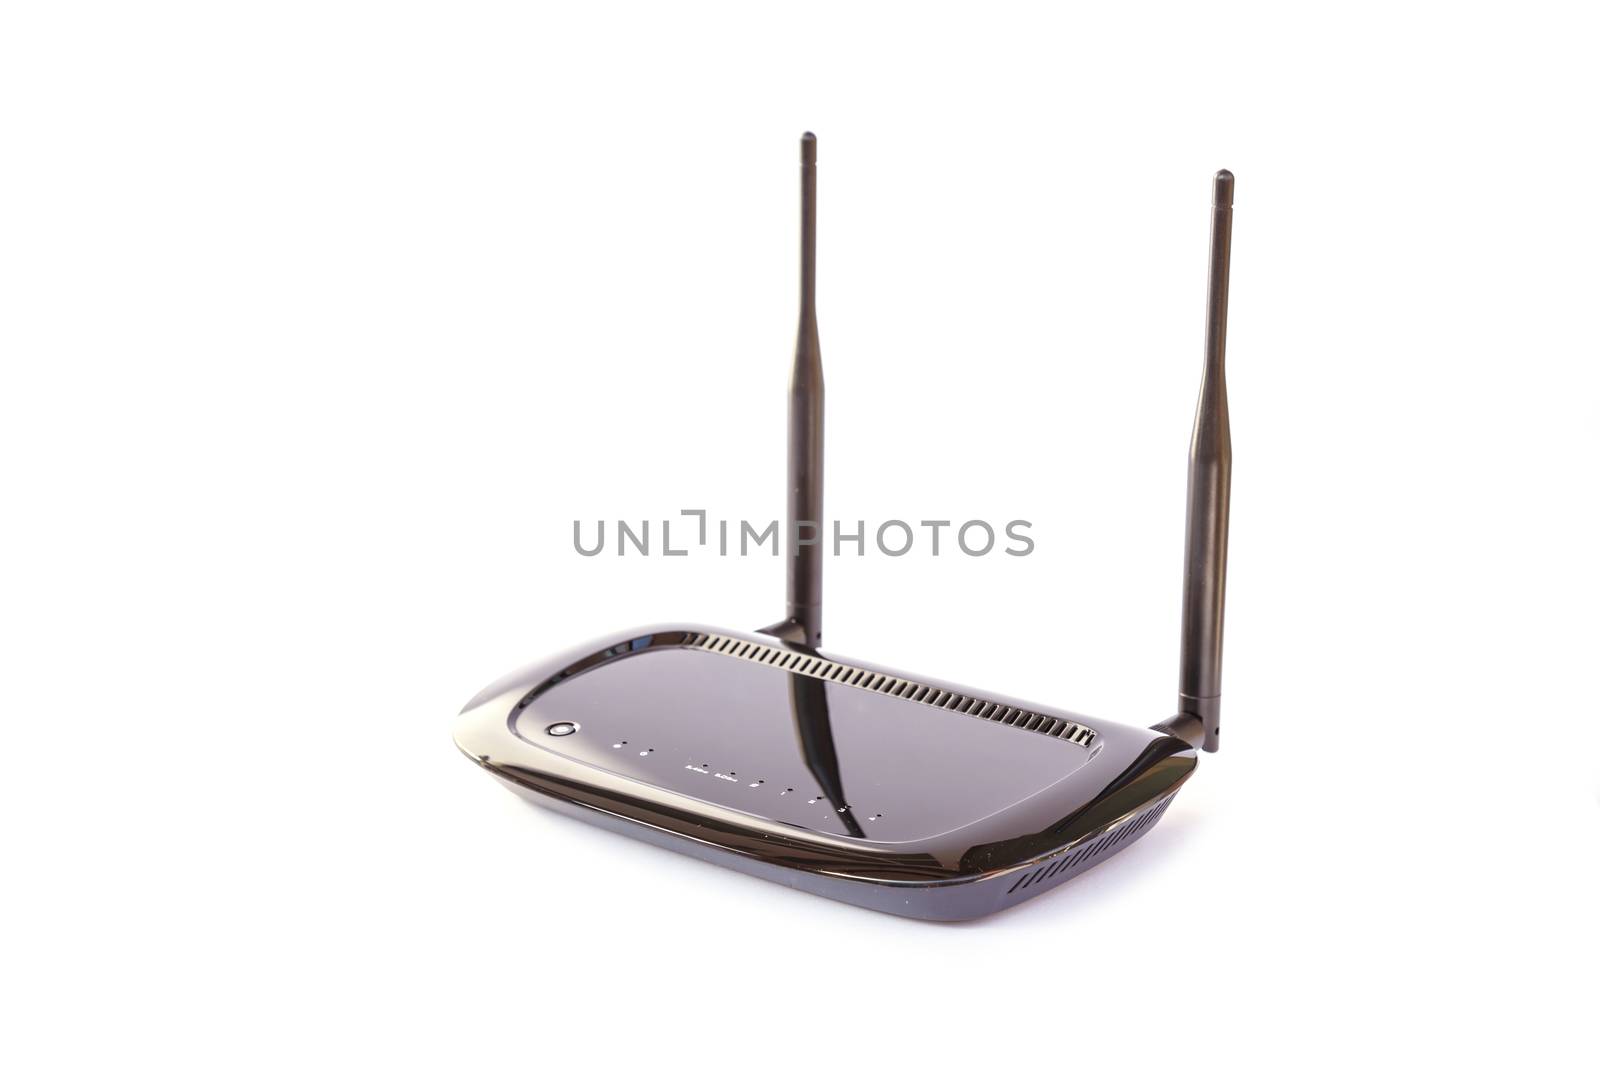 WIFI router isolate on white background by nanDphanuwat